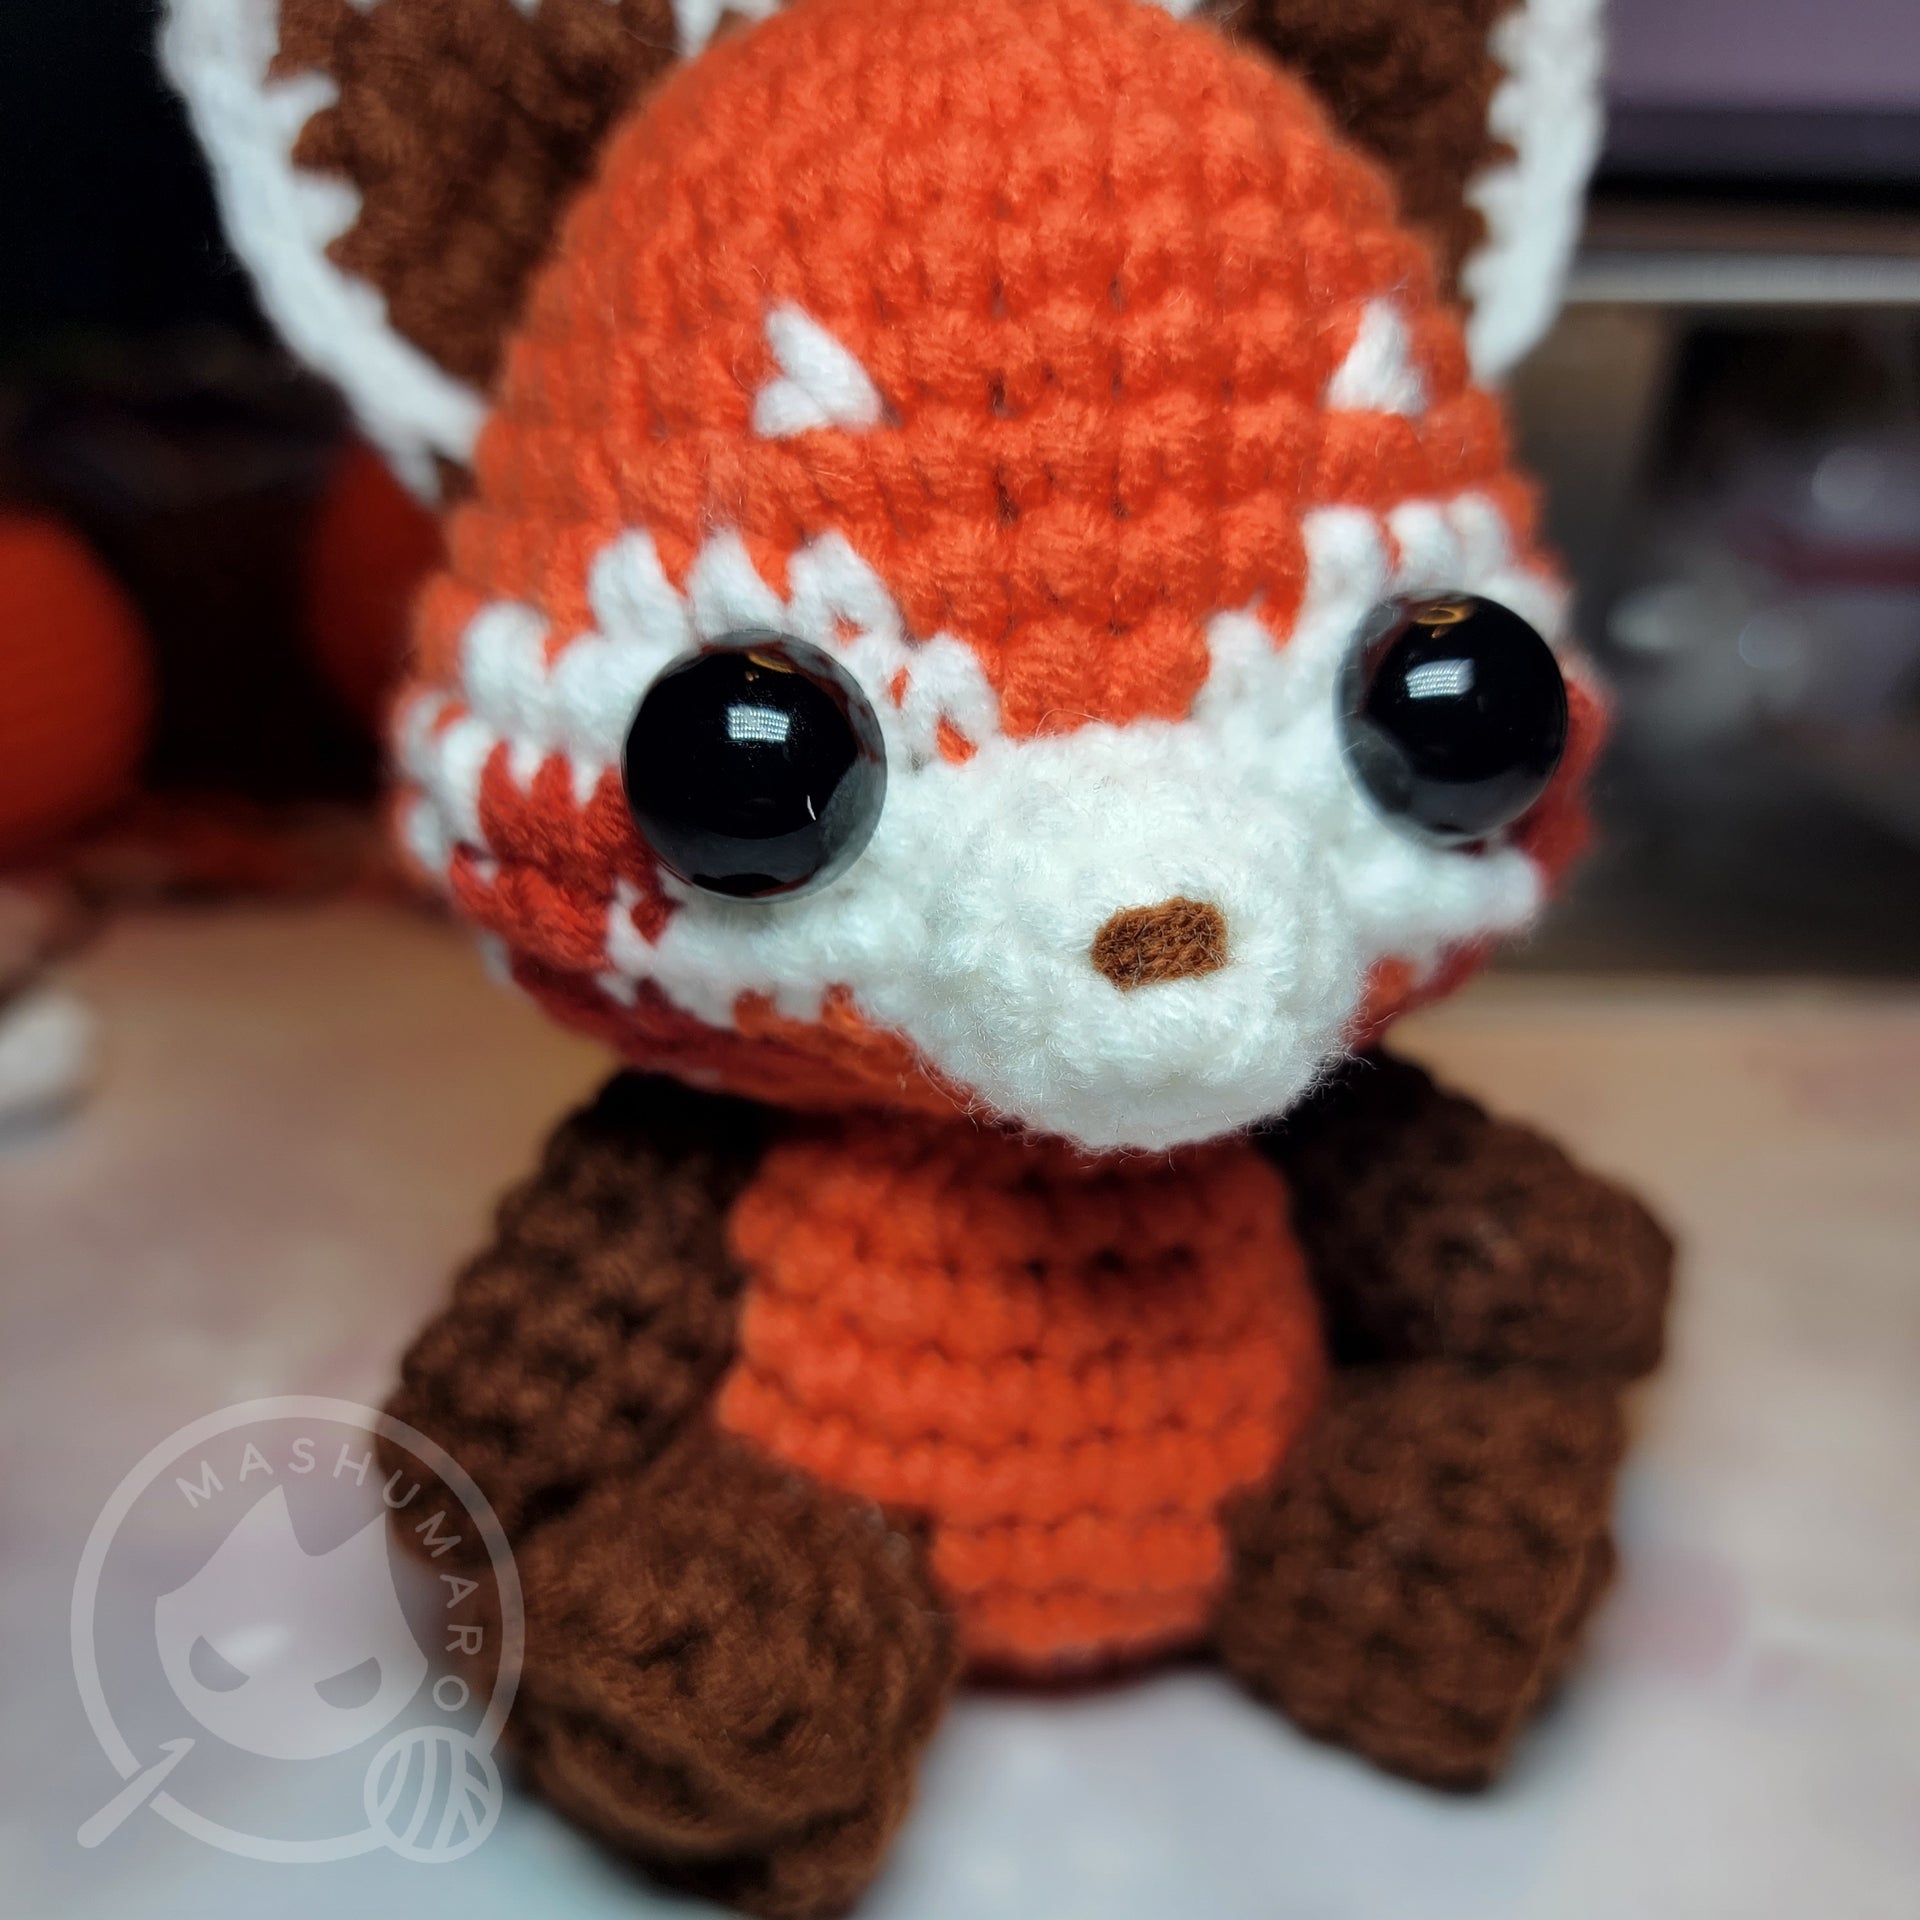 High Gloss High Quality Safety Eyes for Amigurumi Dolls with